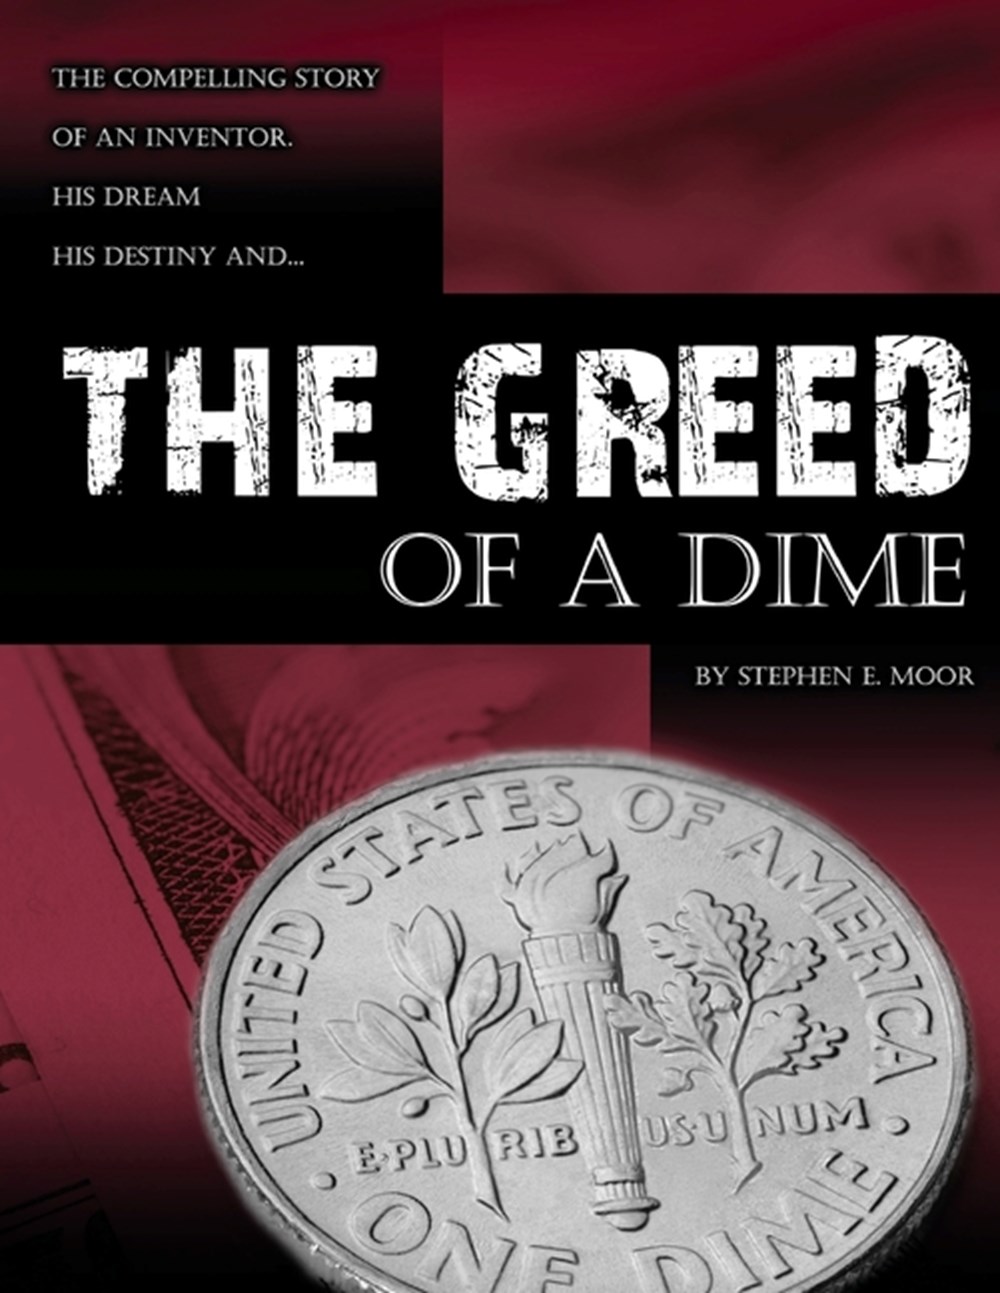 Greed of a Dime The Compelling Story of an Inventor, His Dream His Destiny